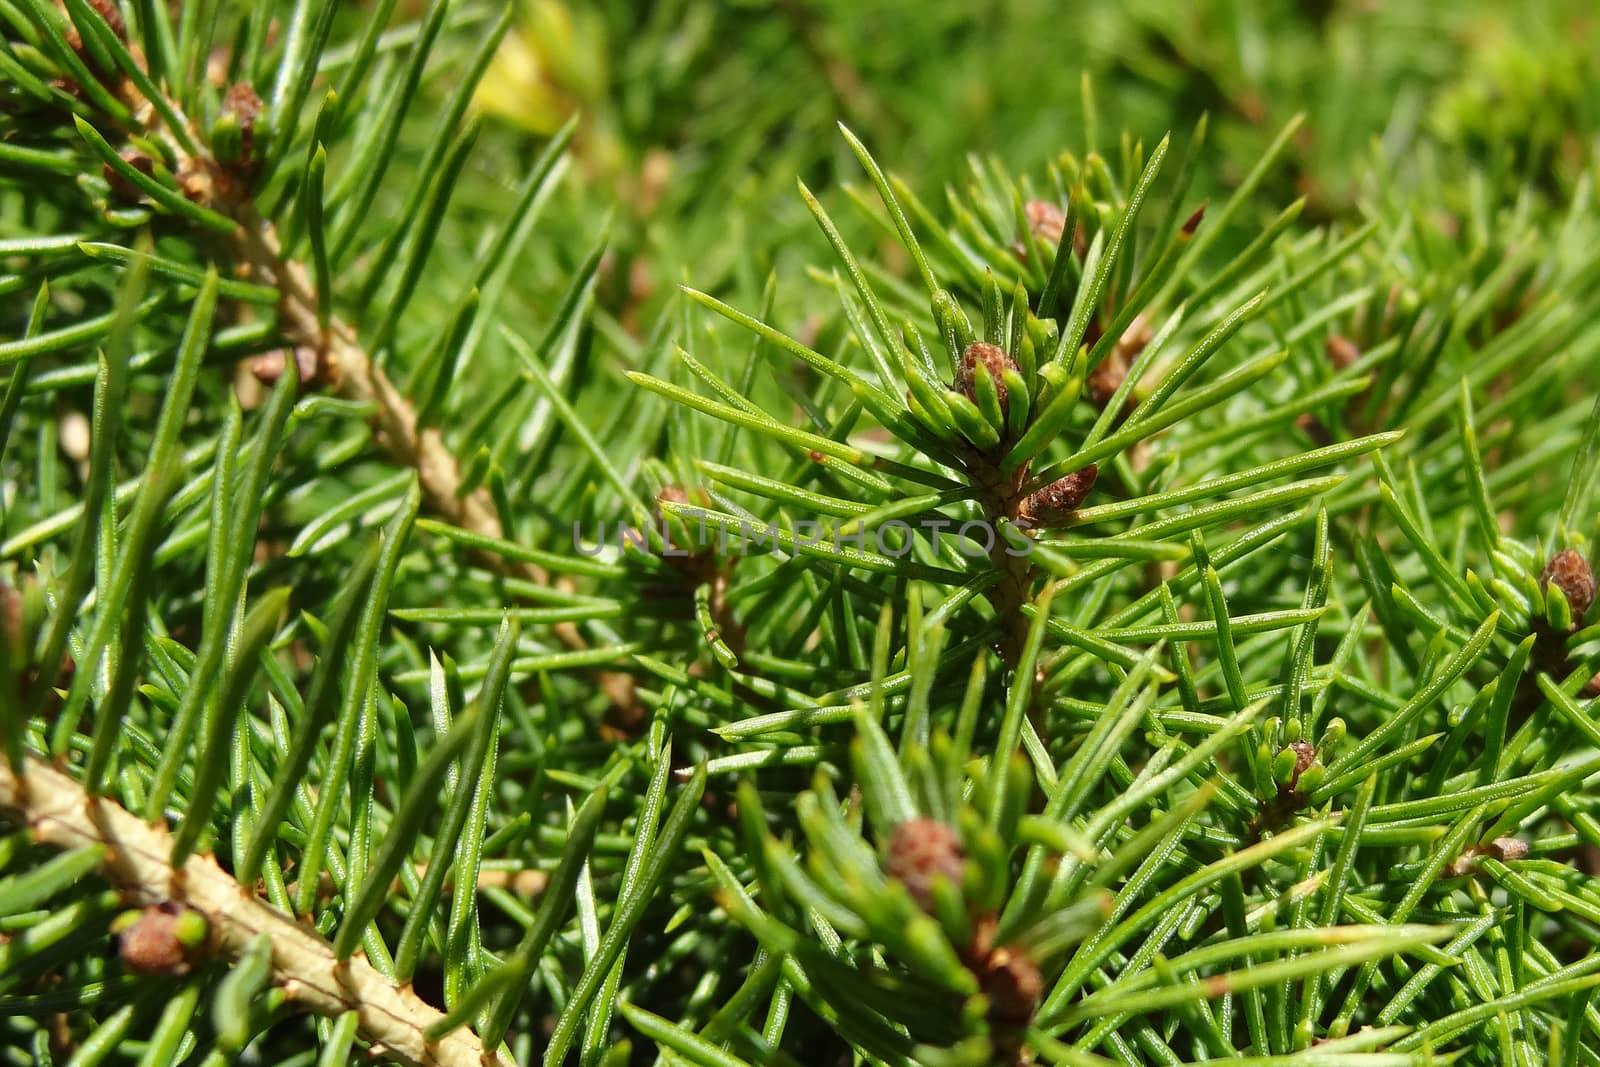 Beautiful green branches of pine or spruce, background